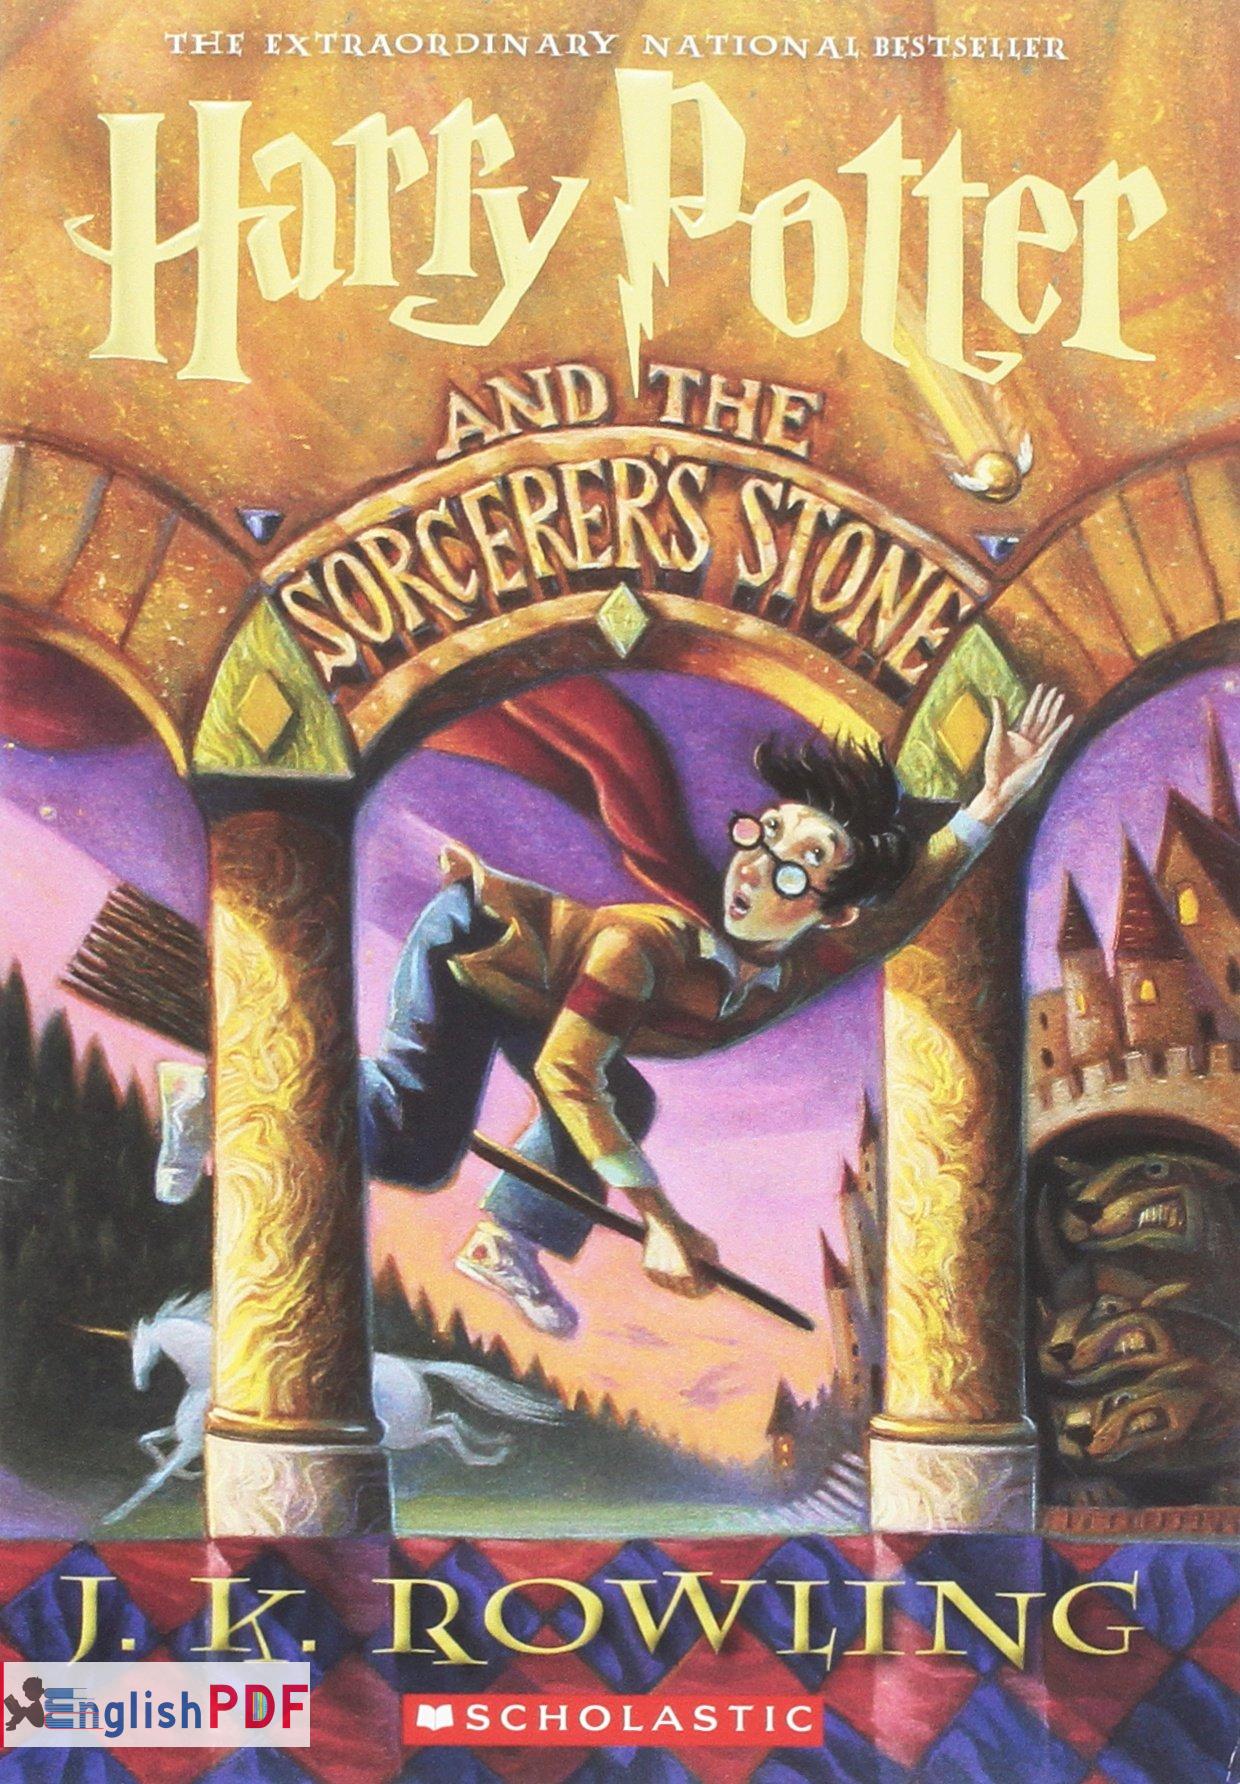 Harry Potter and the Sorcerers Stone PDF EnglishPDF